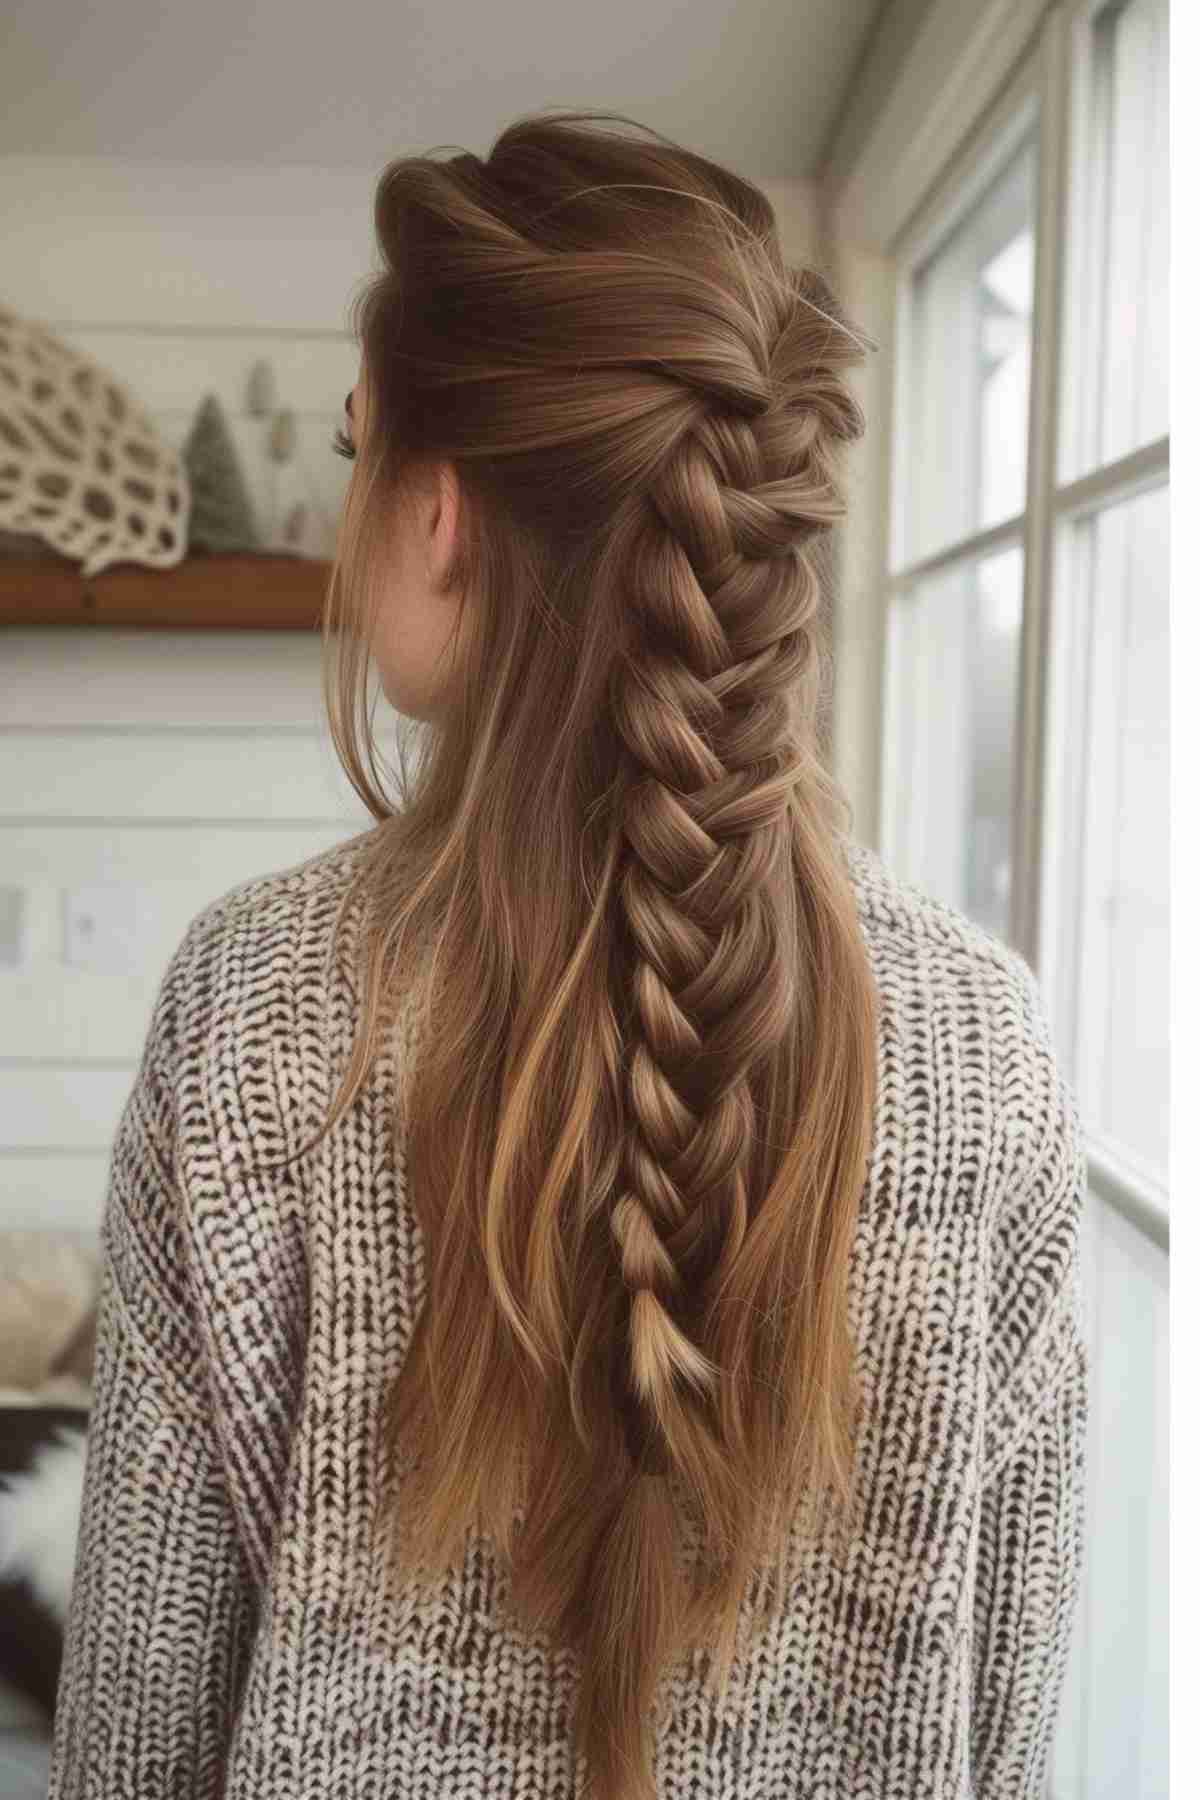 Date Night Whimsical with a Boho Twist hairstyles